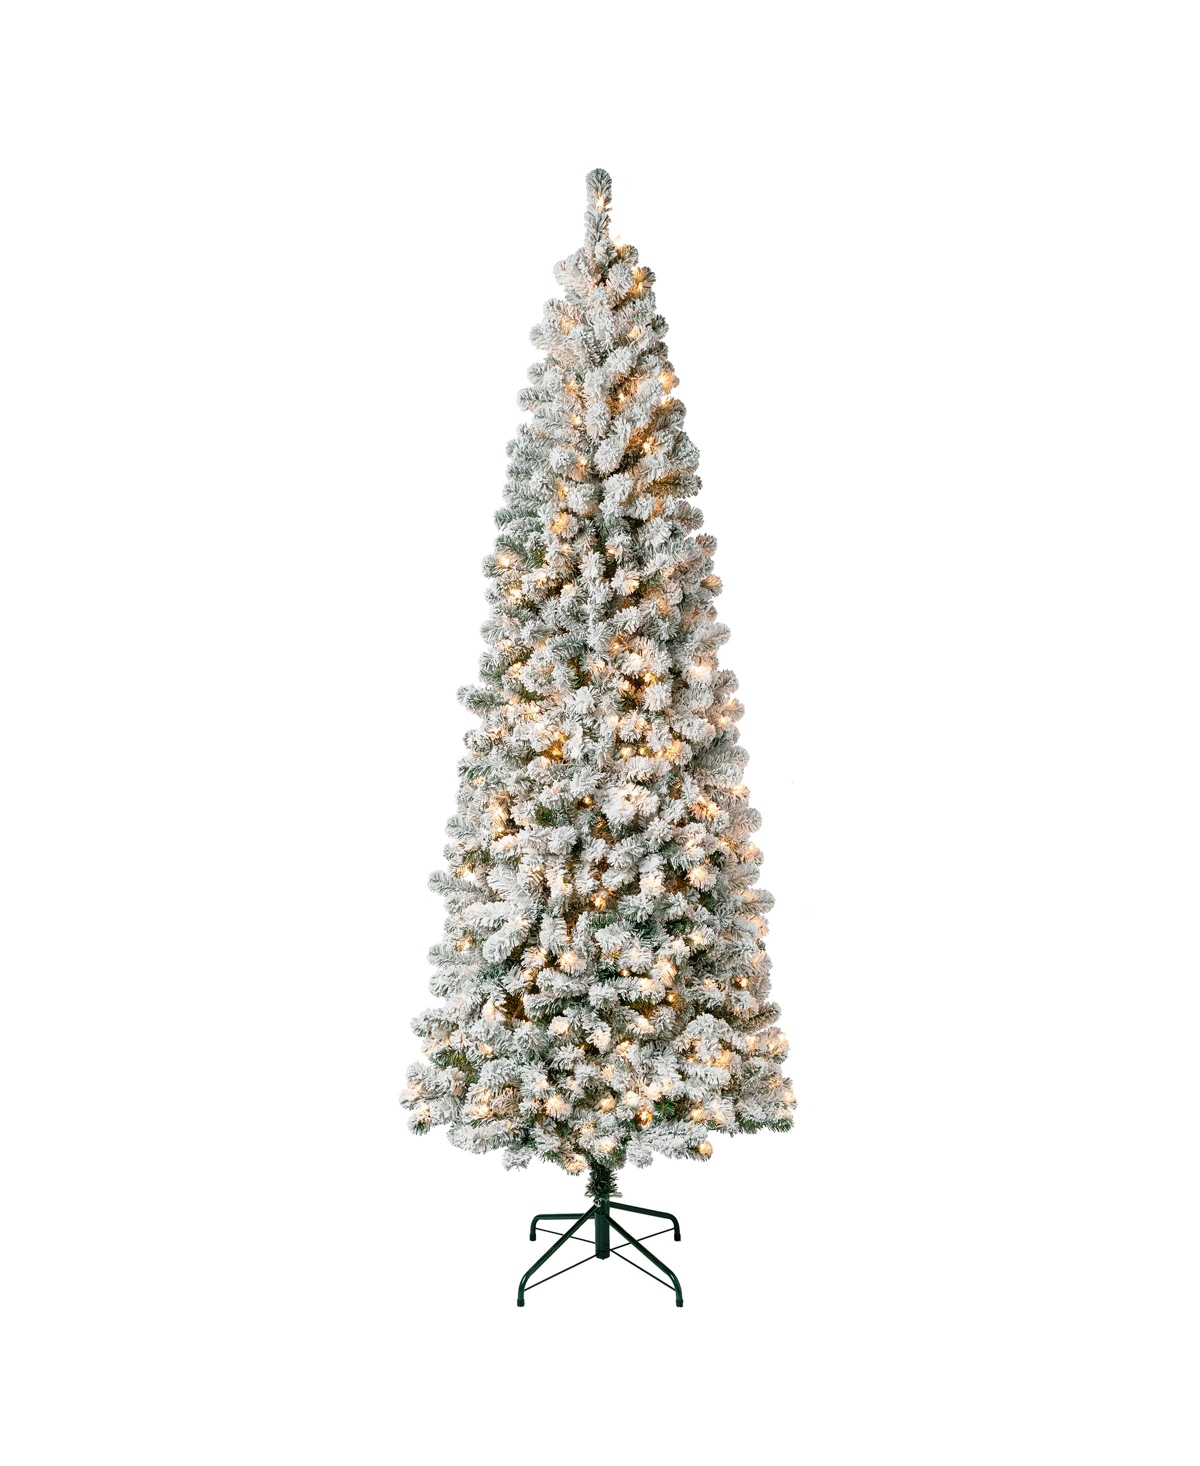 First Traditions 7.5' Acacia Medium Flocked Tree with Clear Lights - Green